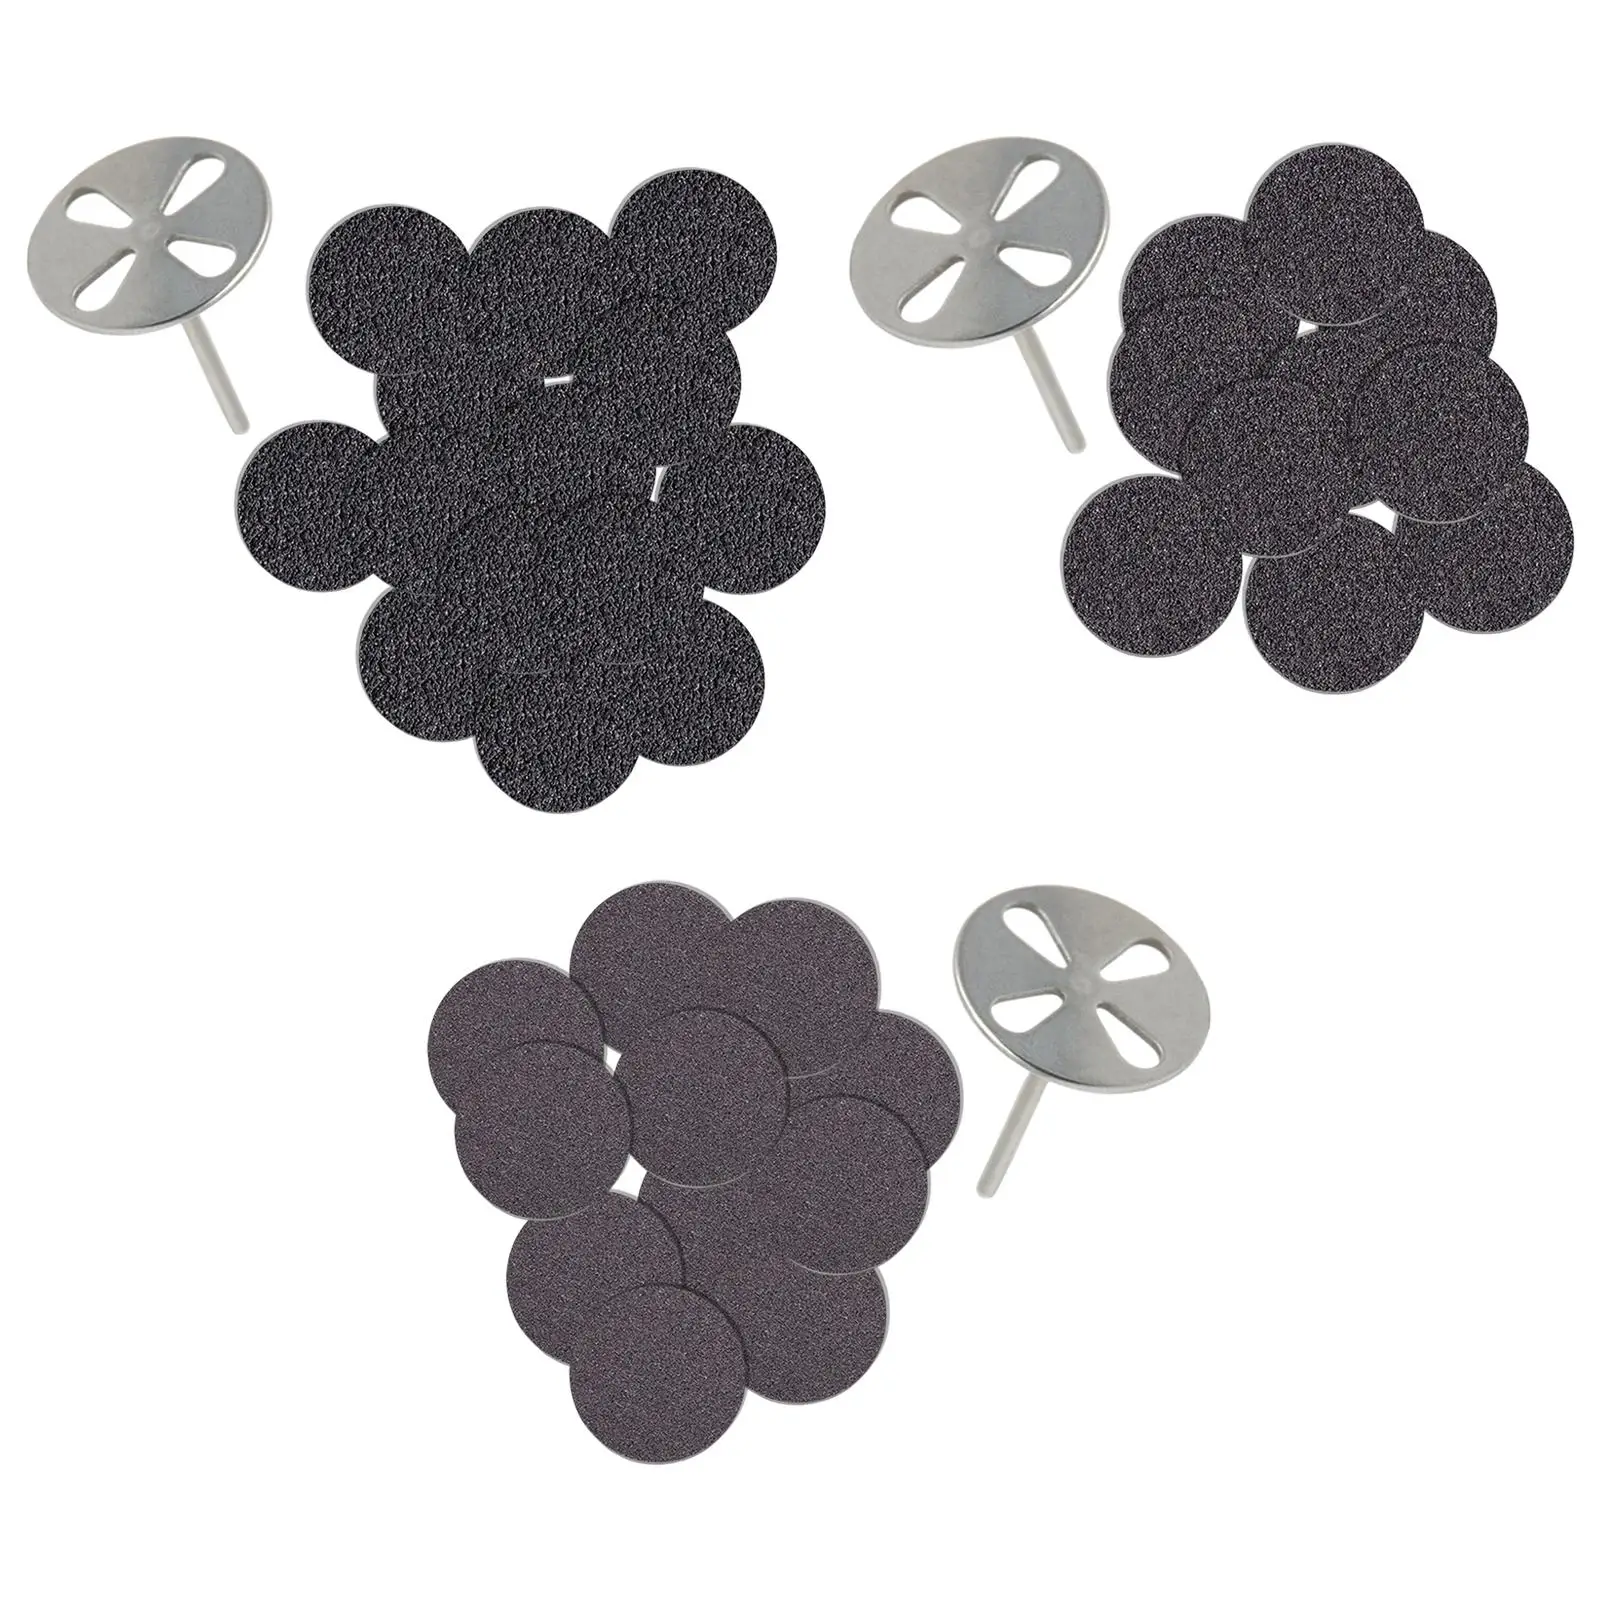 100x Sand Papers Grinding Disc Tool Replaceable Pads for Electric Foot File Pedicure Quick Shortening Nails Cracked Heels Tool